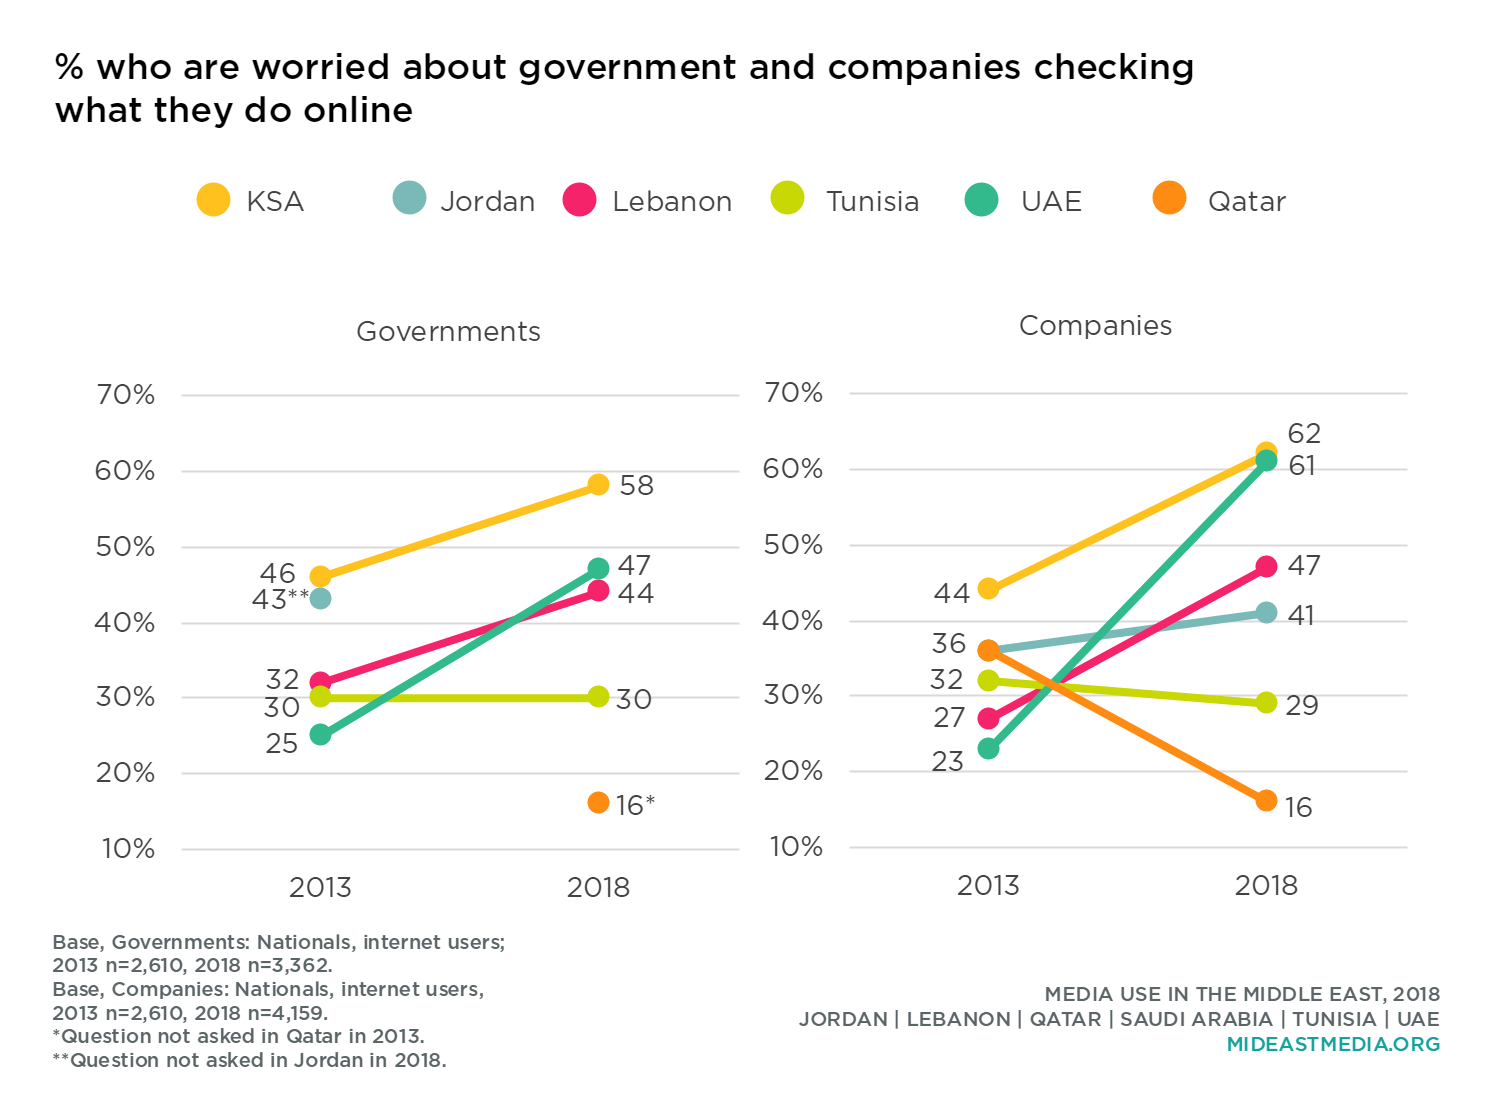 NU-Q’s annual media use survey found that more Saudi and Emirati internet users worry about online surveillance, either by companies (62 percent, 61 percent) or government (58 percent, 47 percent), compared to others. Only 16 percent of Qatari internet users are concerned about either online corporate or government surveillance.